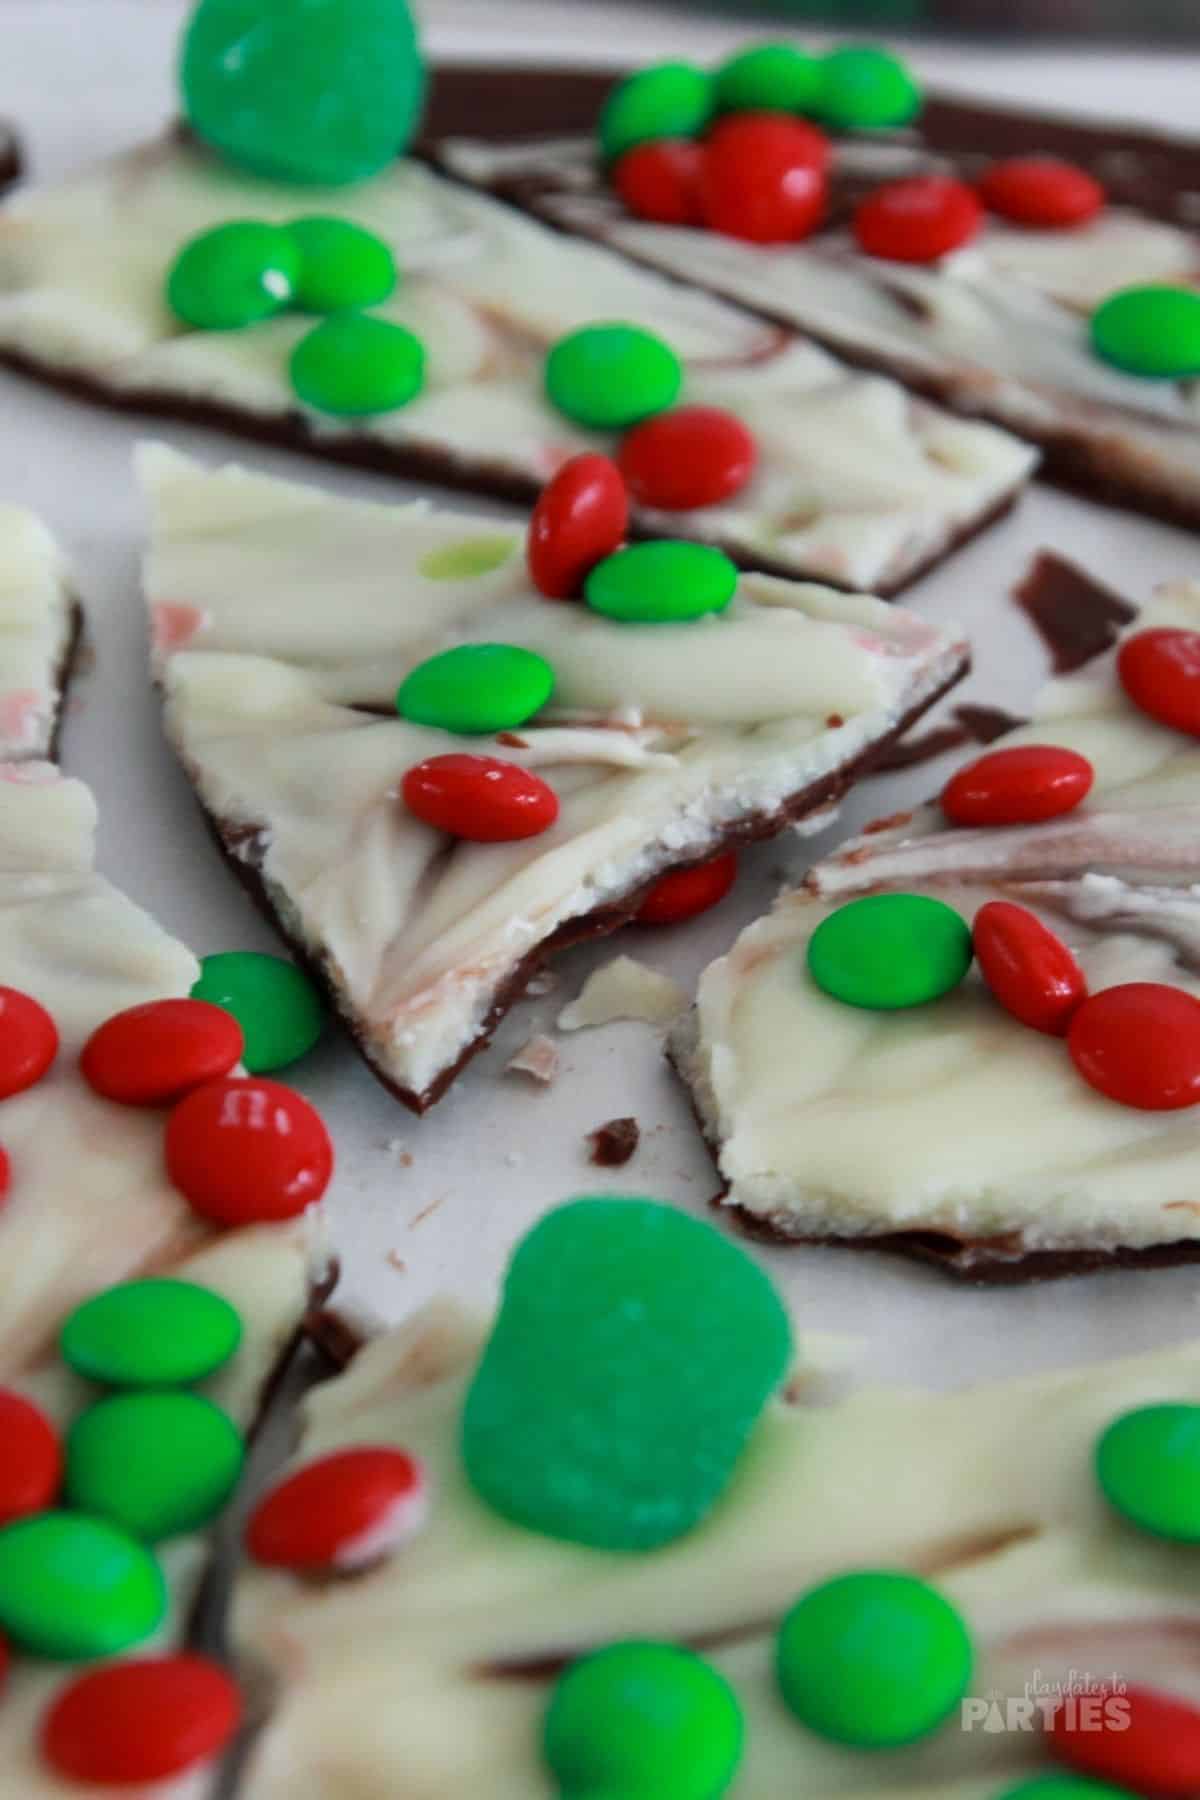 Pieces of holiday candy with M&Ms and gumdrops.